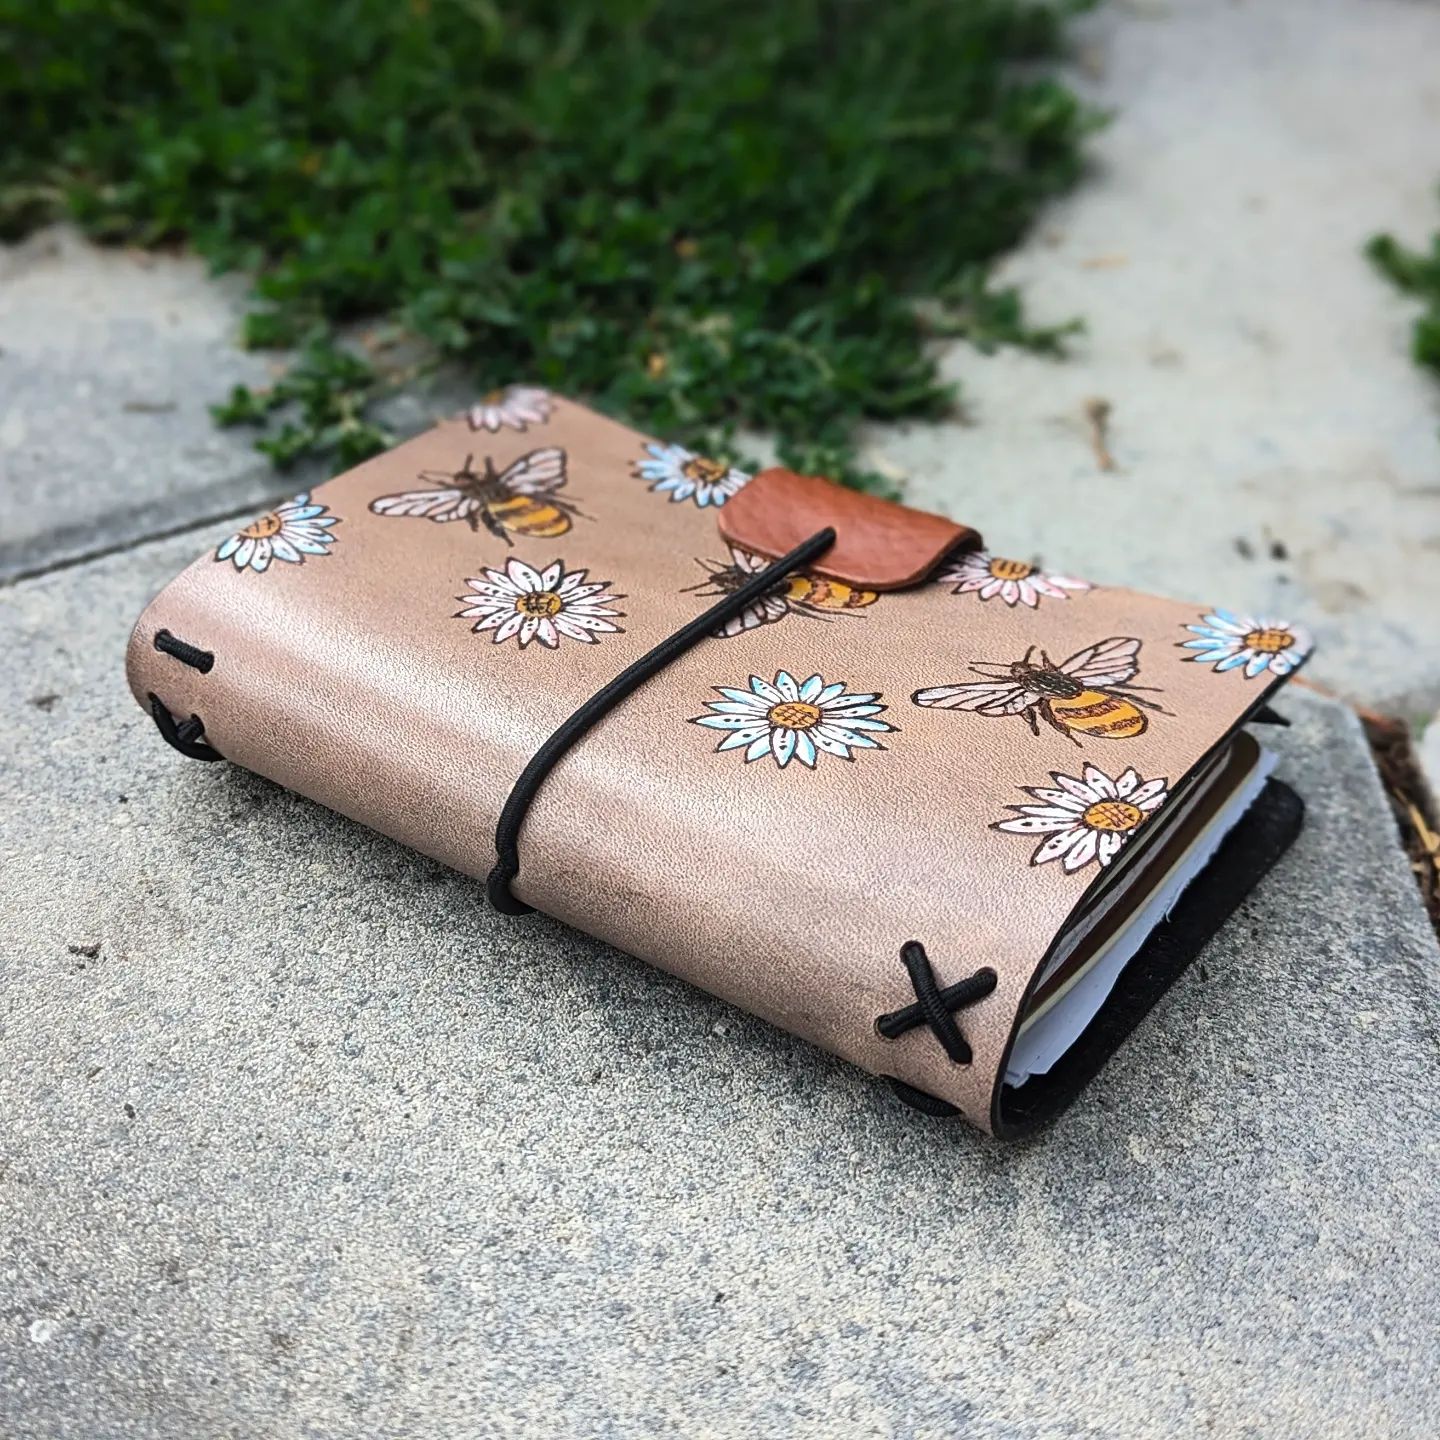 Field Notes-Size Fauxdori Refillable Notebook | Pyrography Bees + Flowers